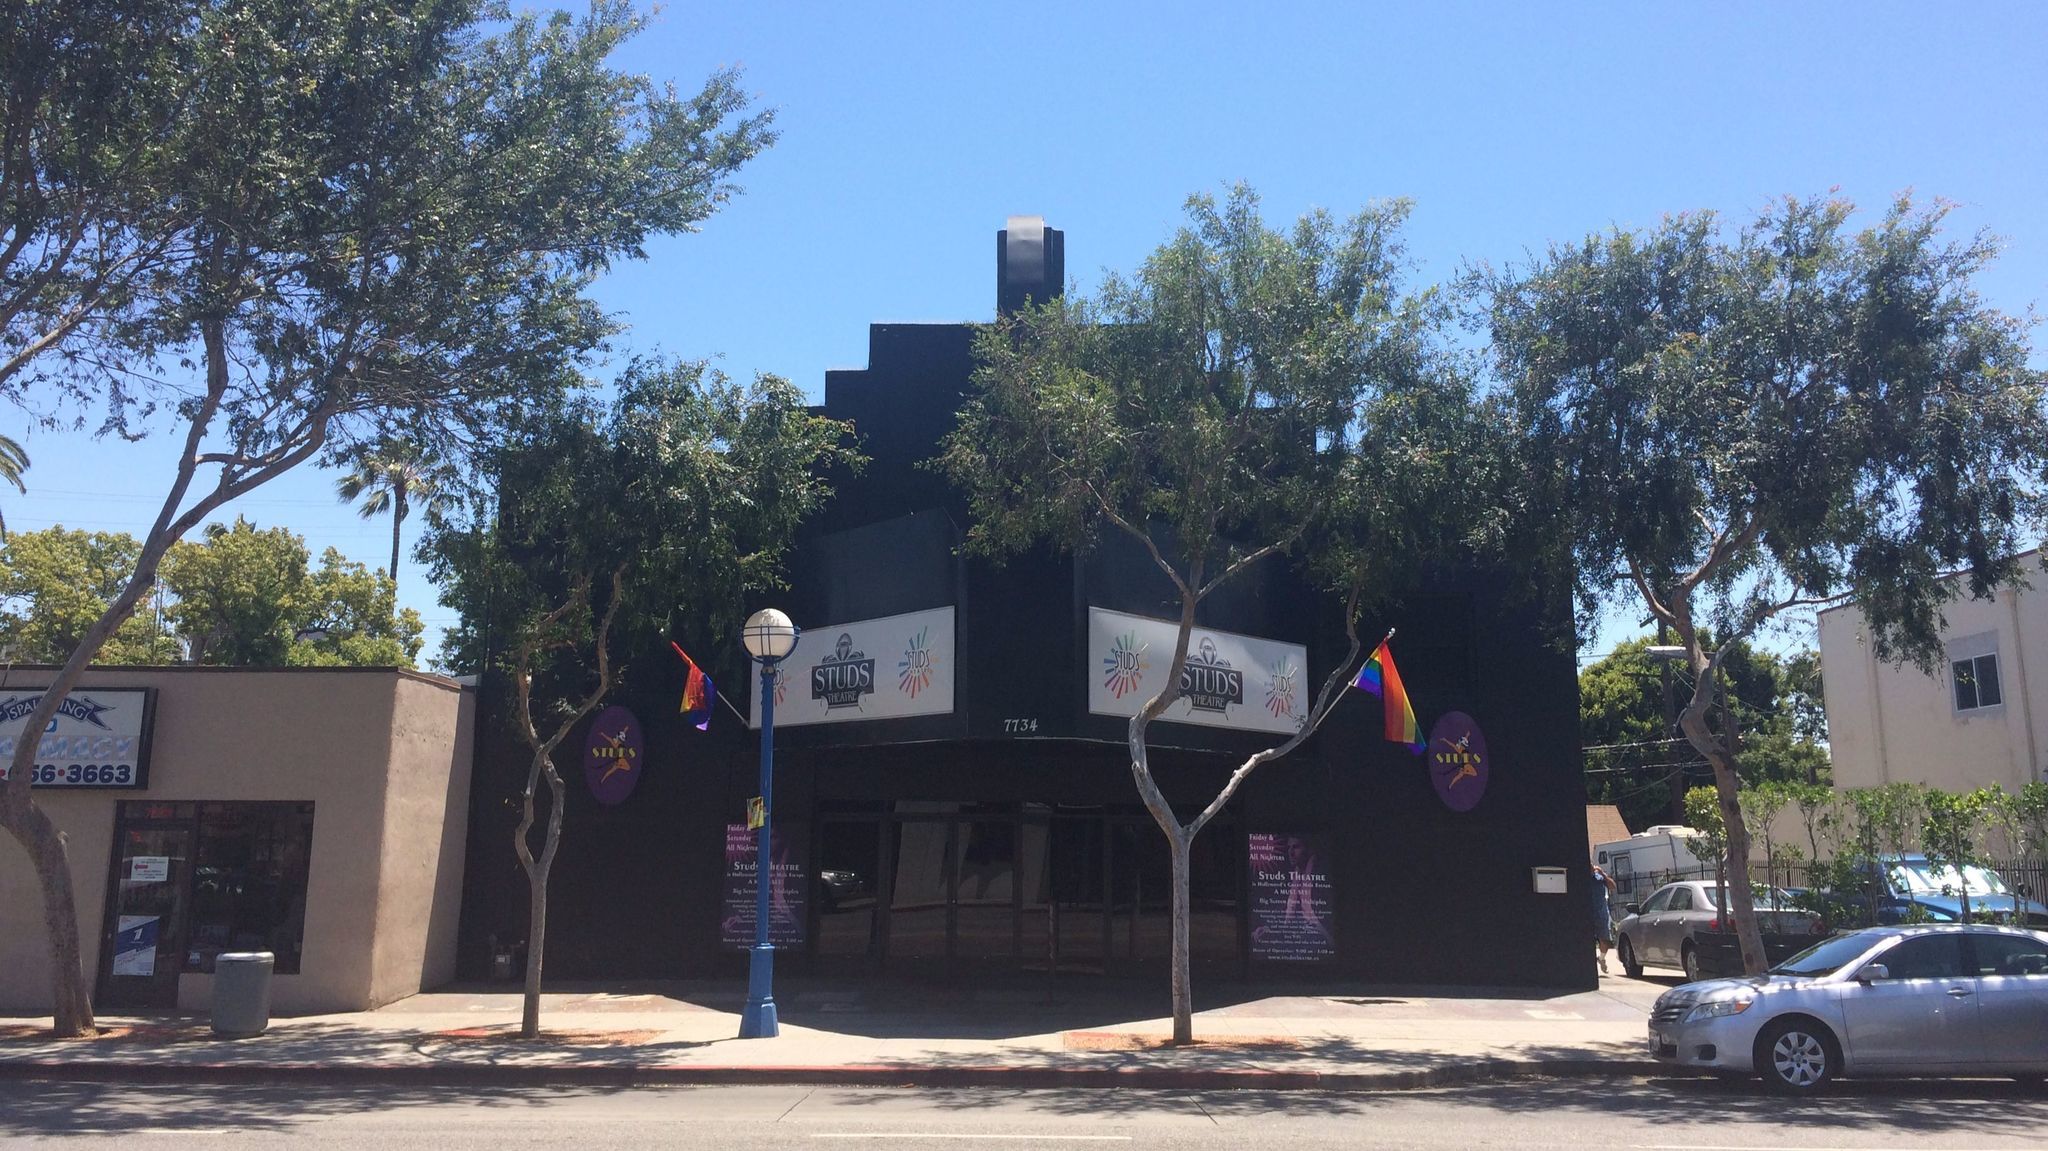 The Studs adult theater in West Hollywood is housed in a building that was built in 1940 and once housed one of the legendary Pussycat adult cinemas in the '70s.